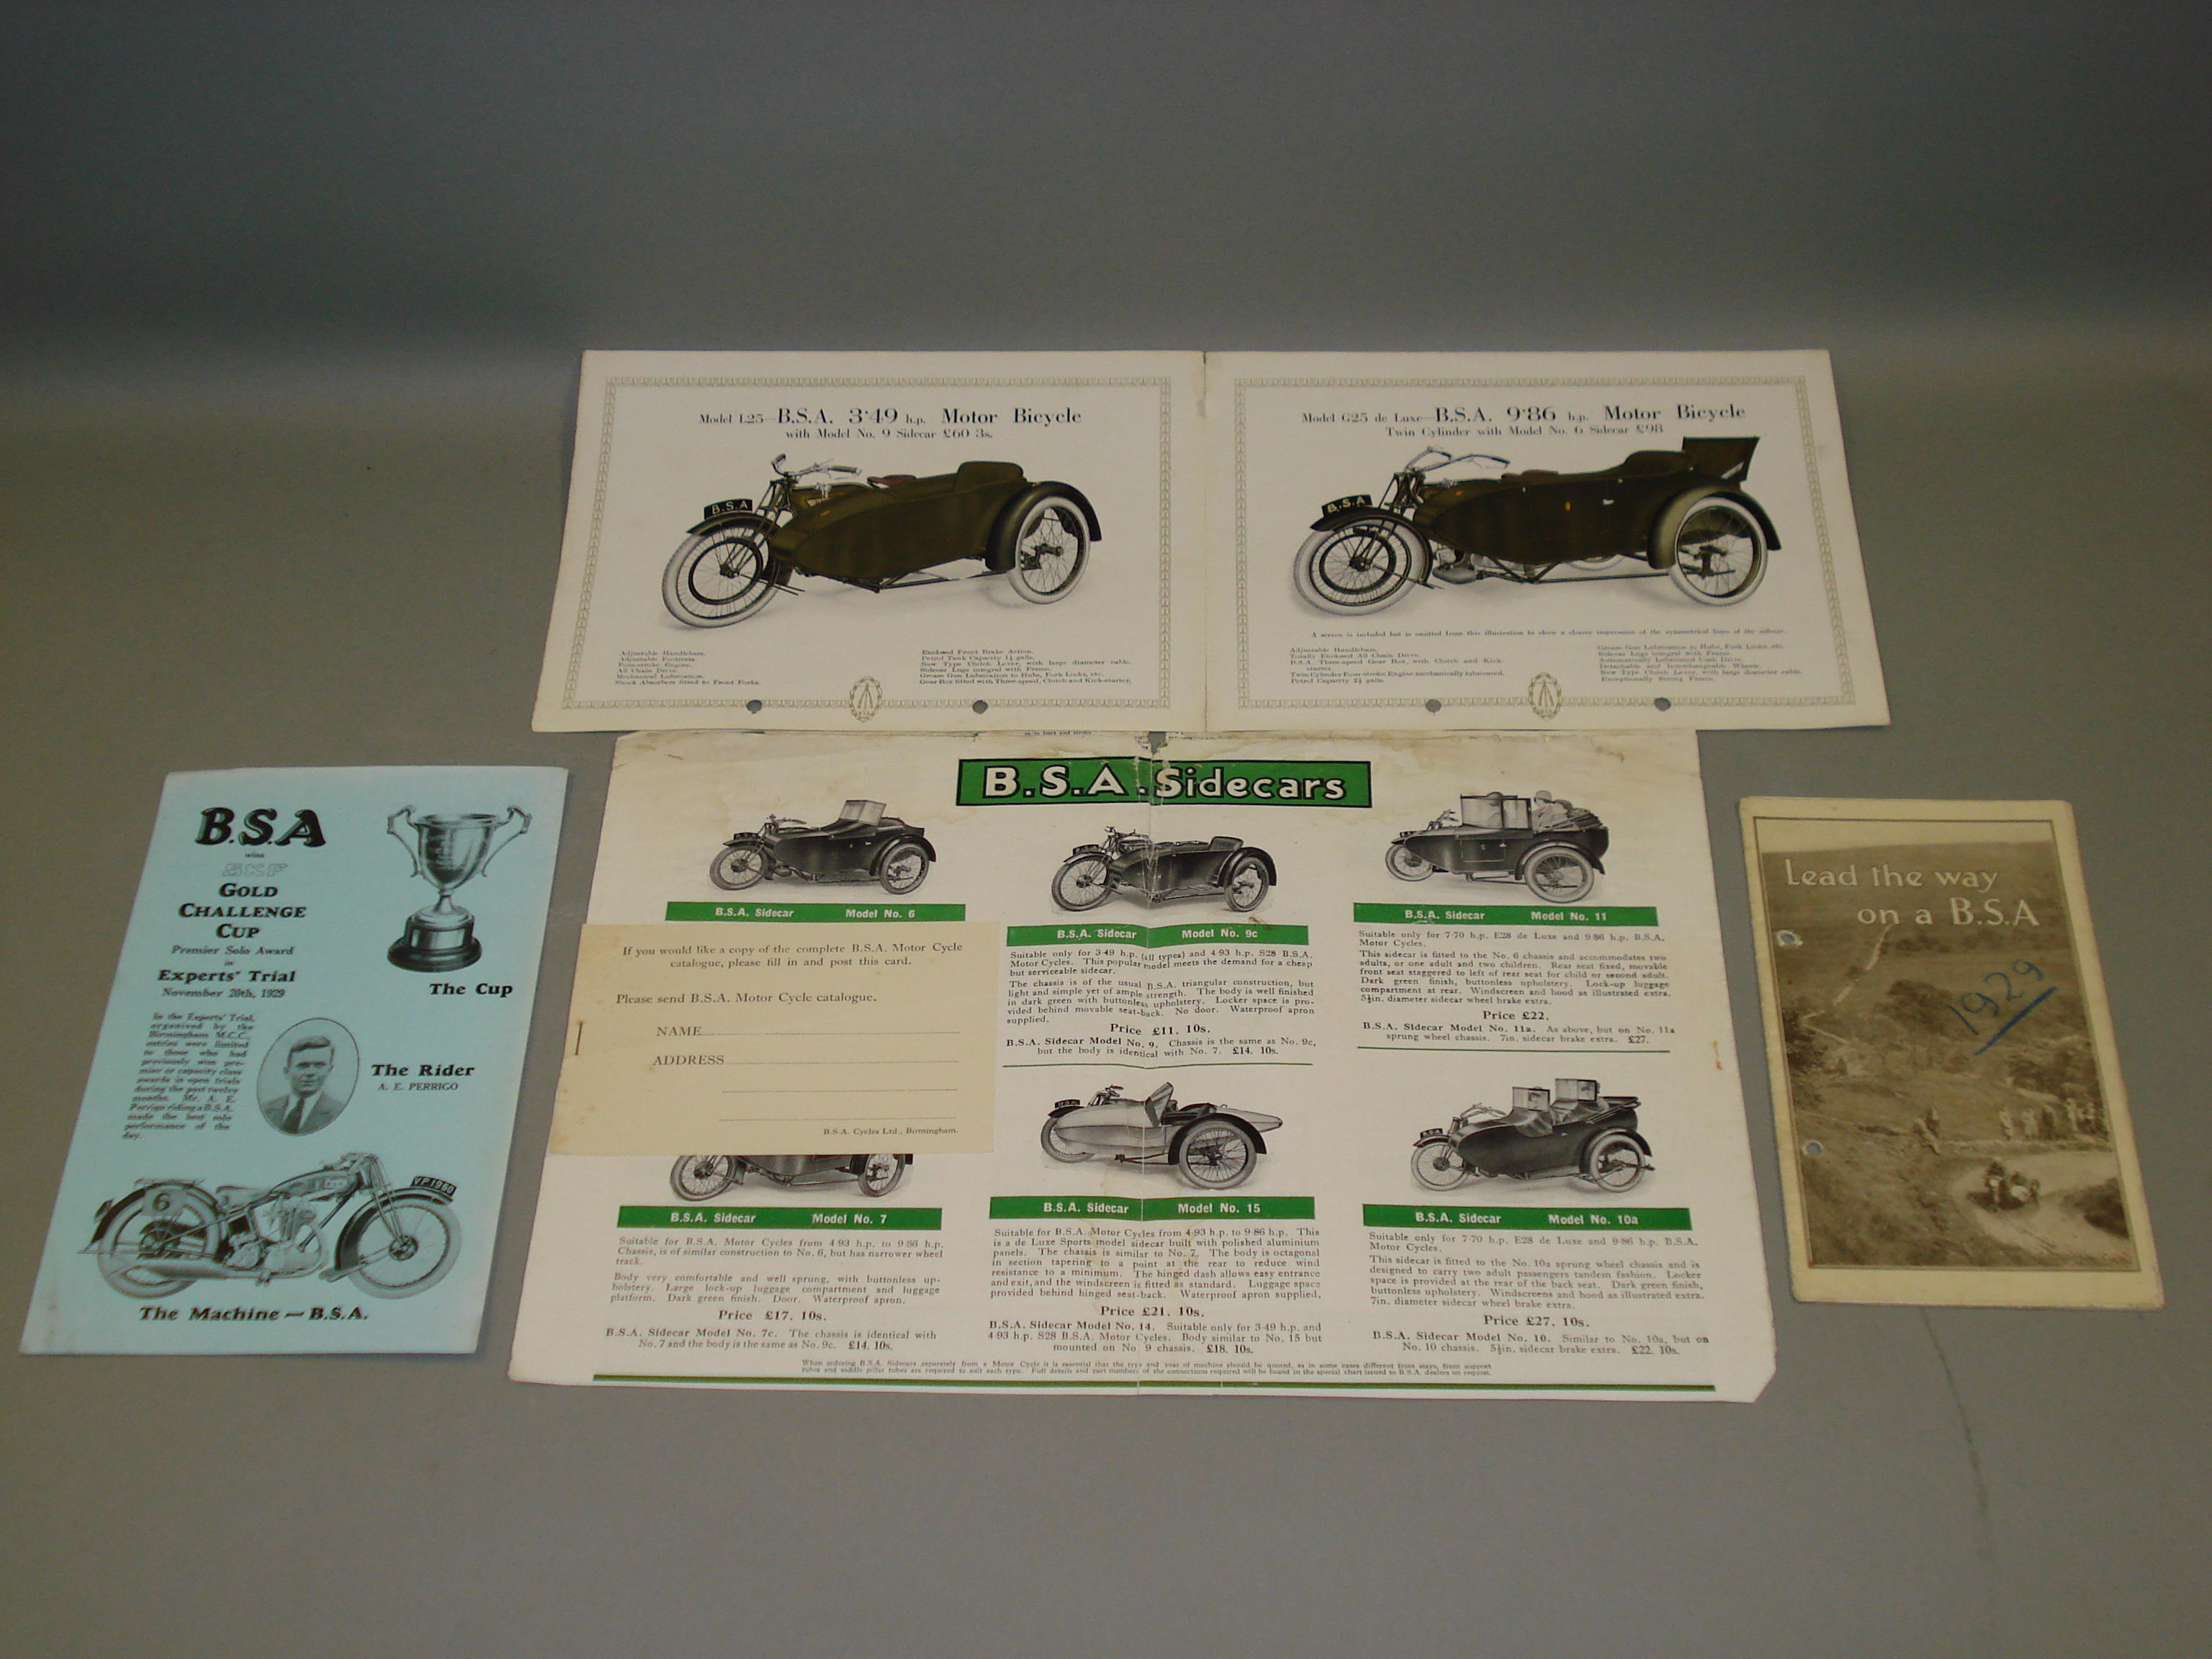 BSA sales brochures dating from the 1920s,